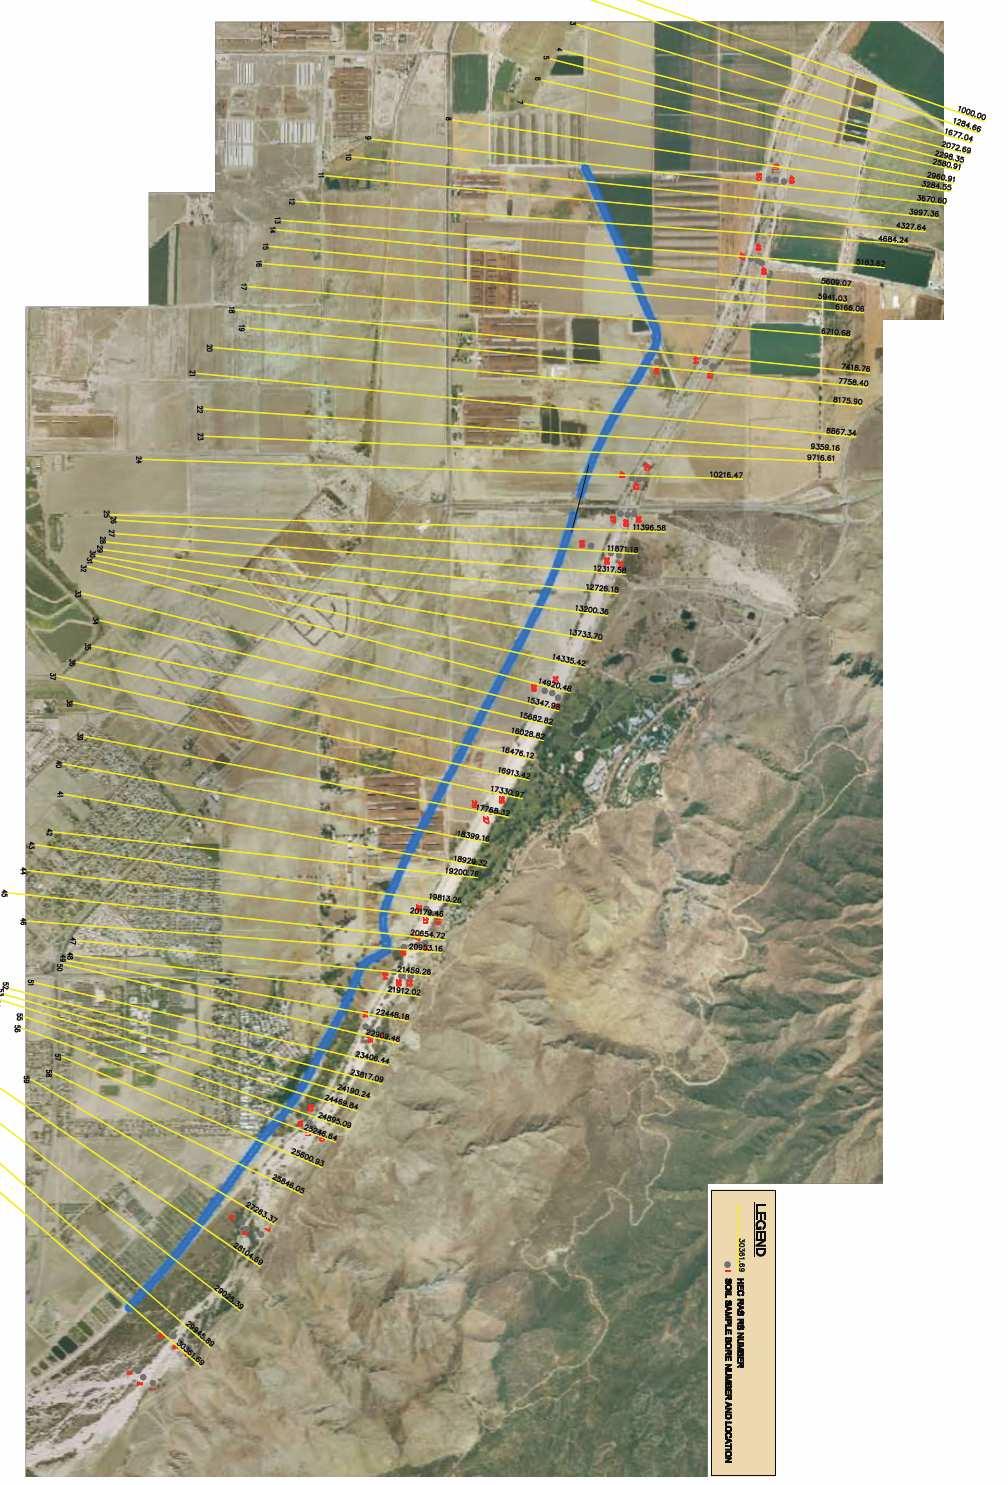 Figure 4-1 Sediment sample locations relative to the proposed levee and